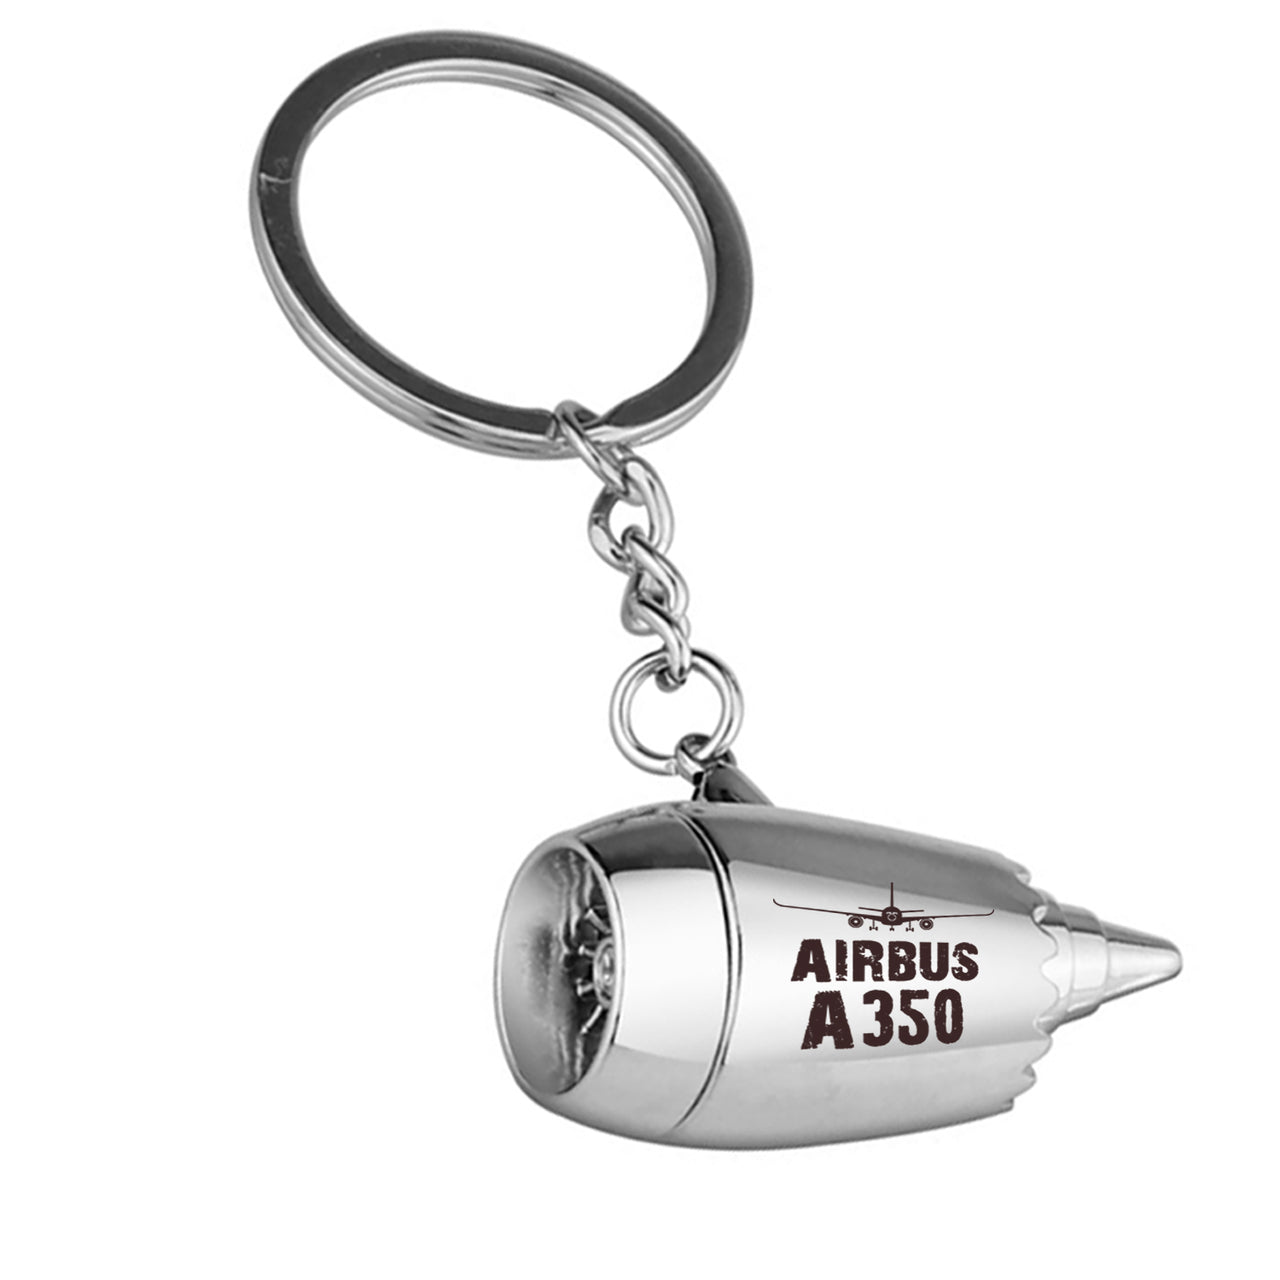 Airbus A350 & Plane Designed Airplane Jet Engine Shaped Key Chain